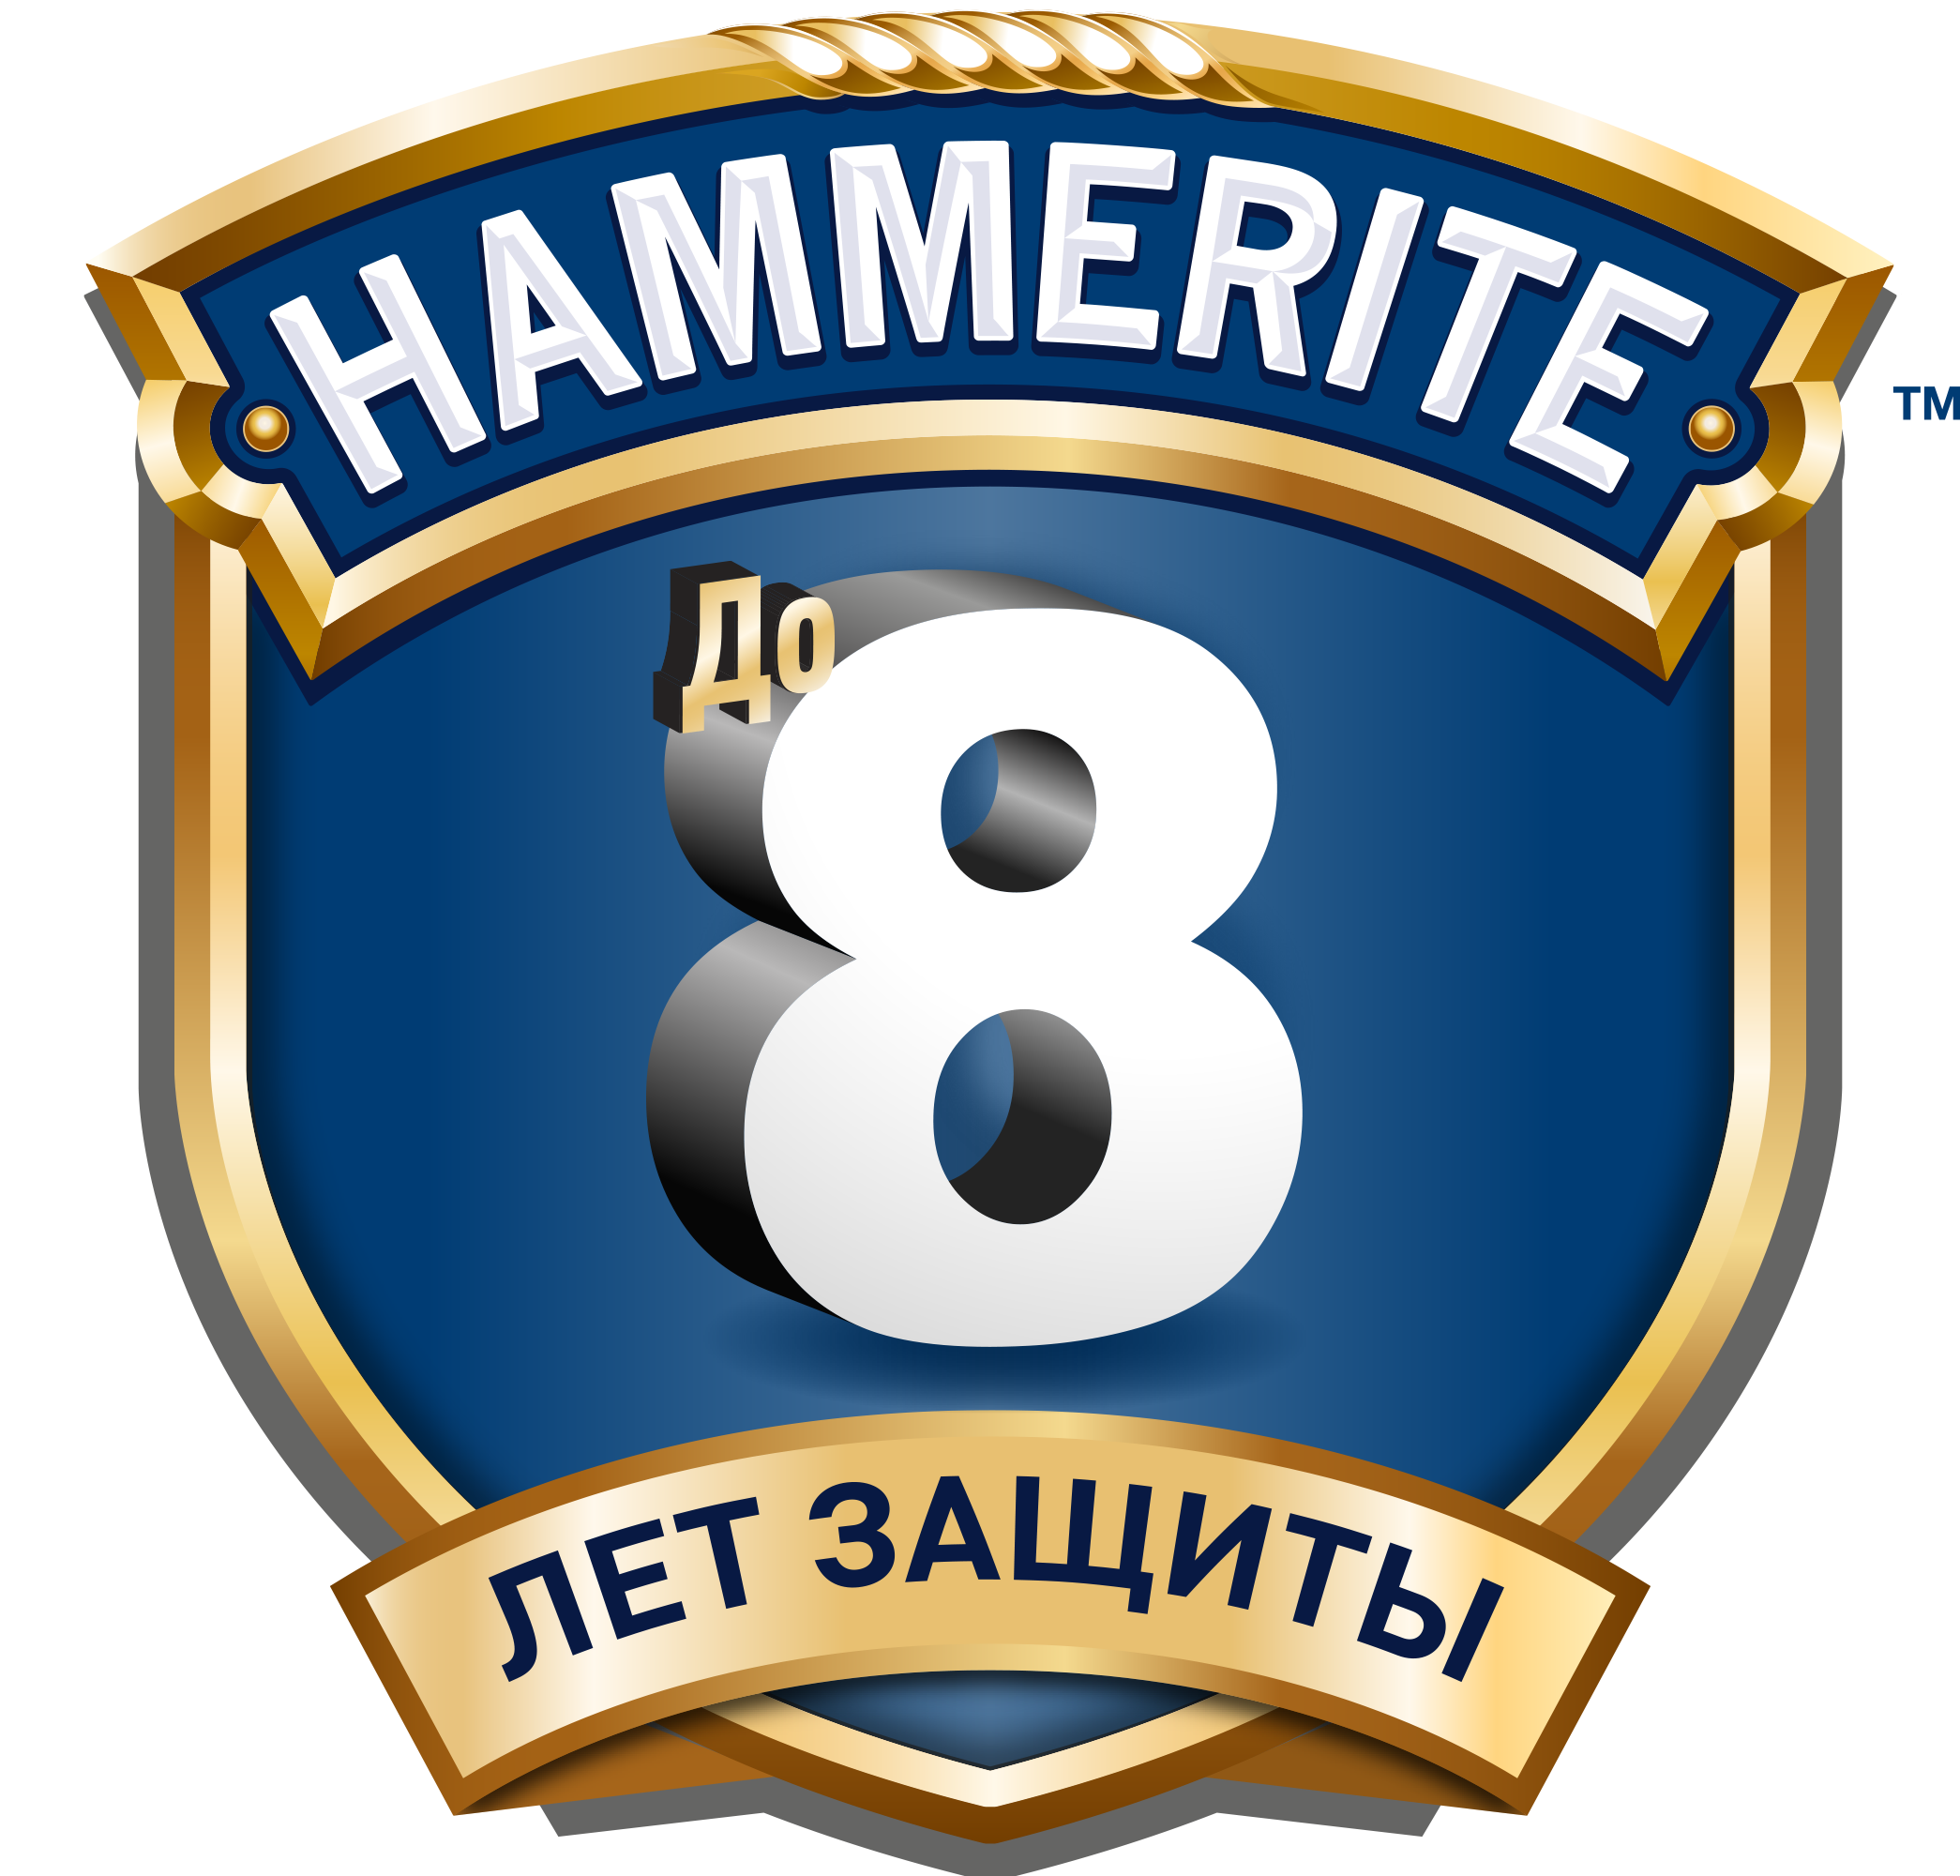 Hammerite - 8 years of protection